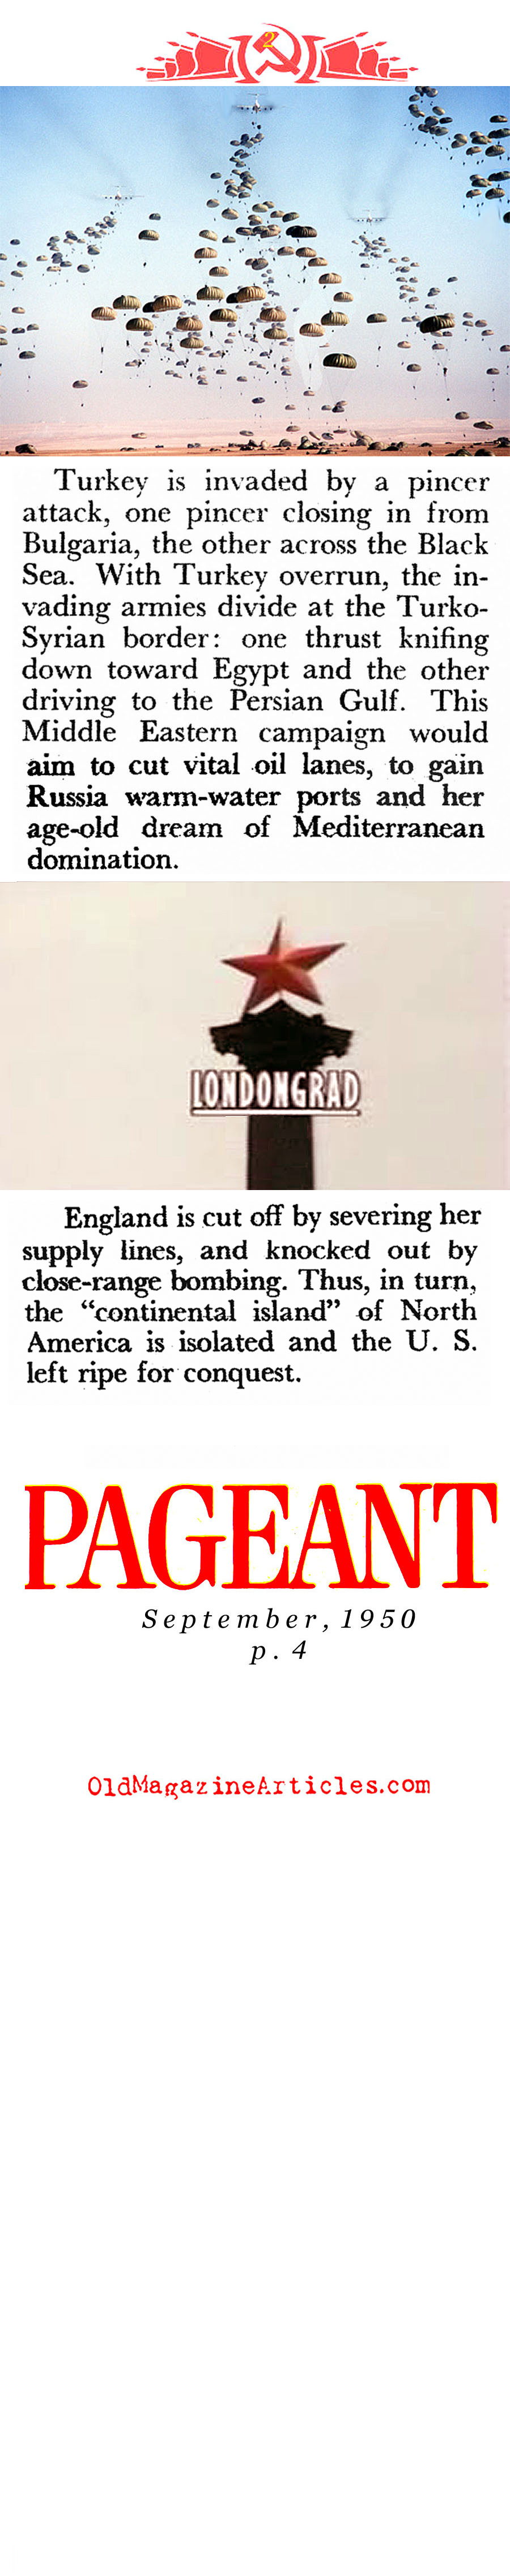 How the Soviets Would Have Attacked (Pageant Magazine, 1950)